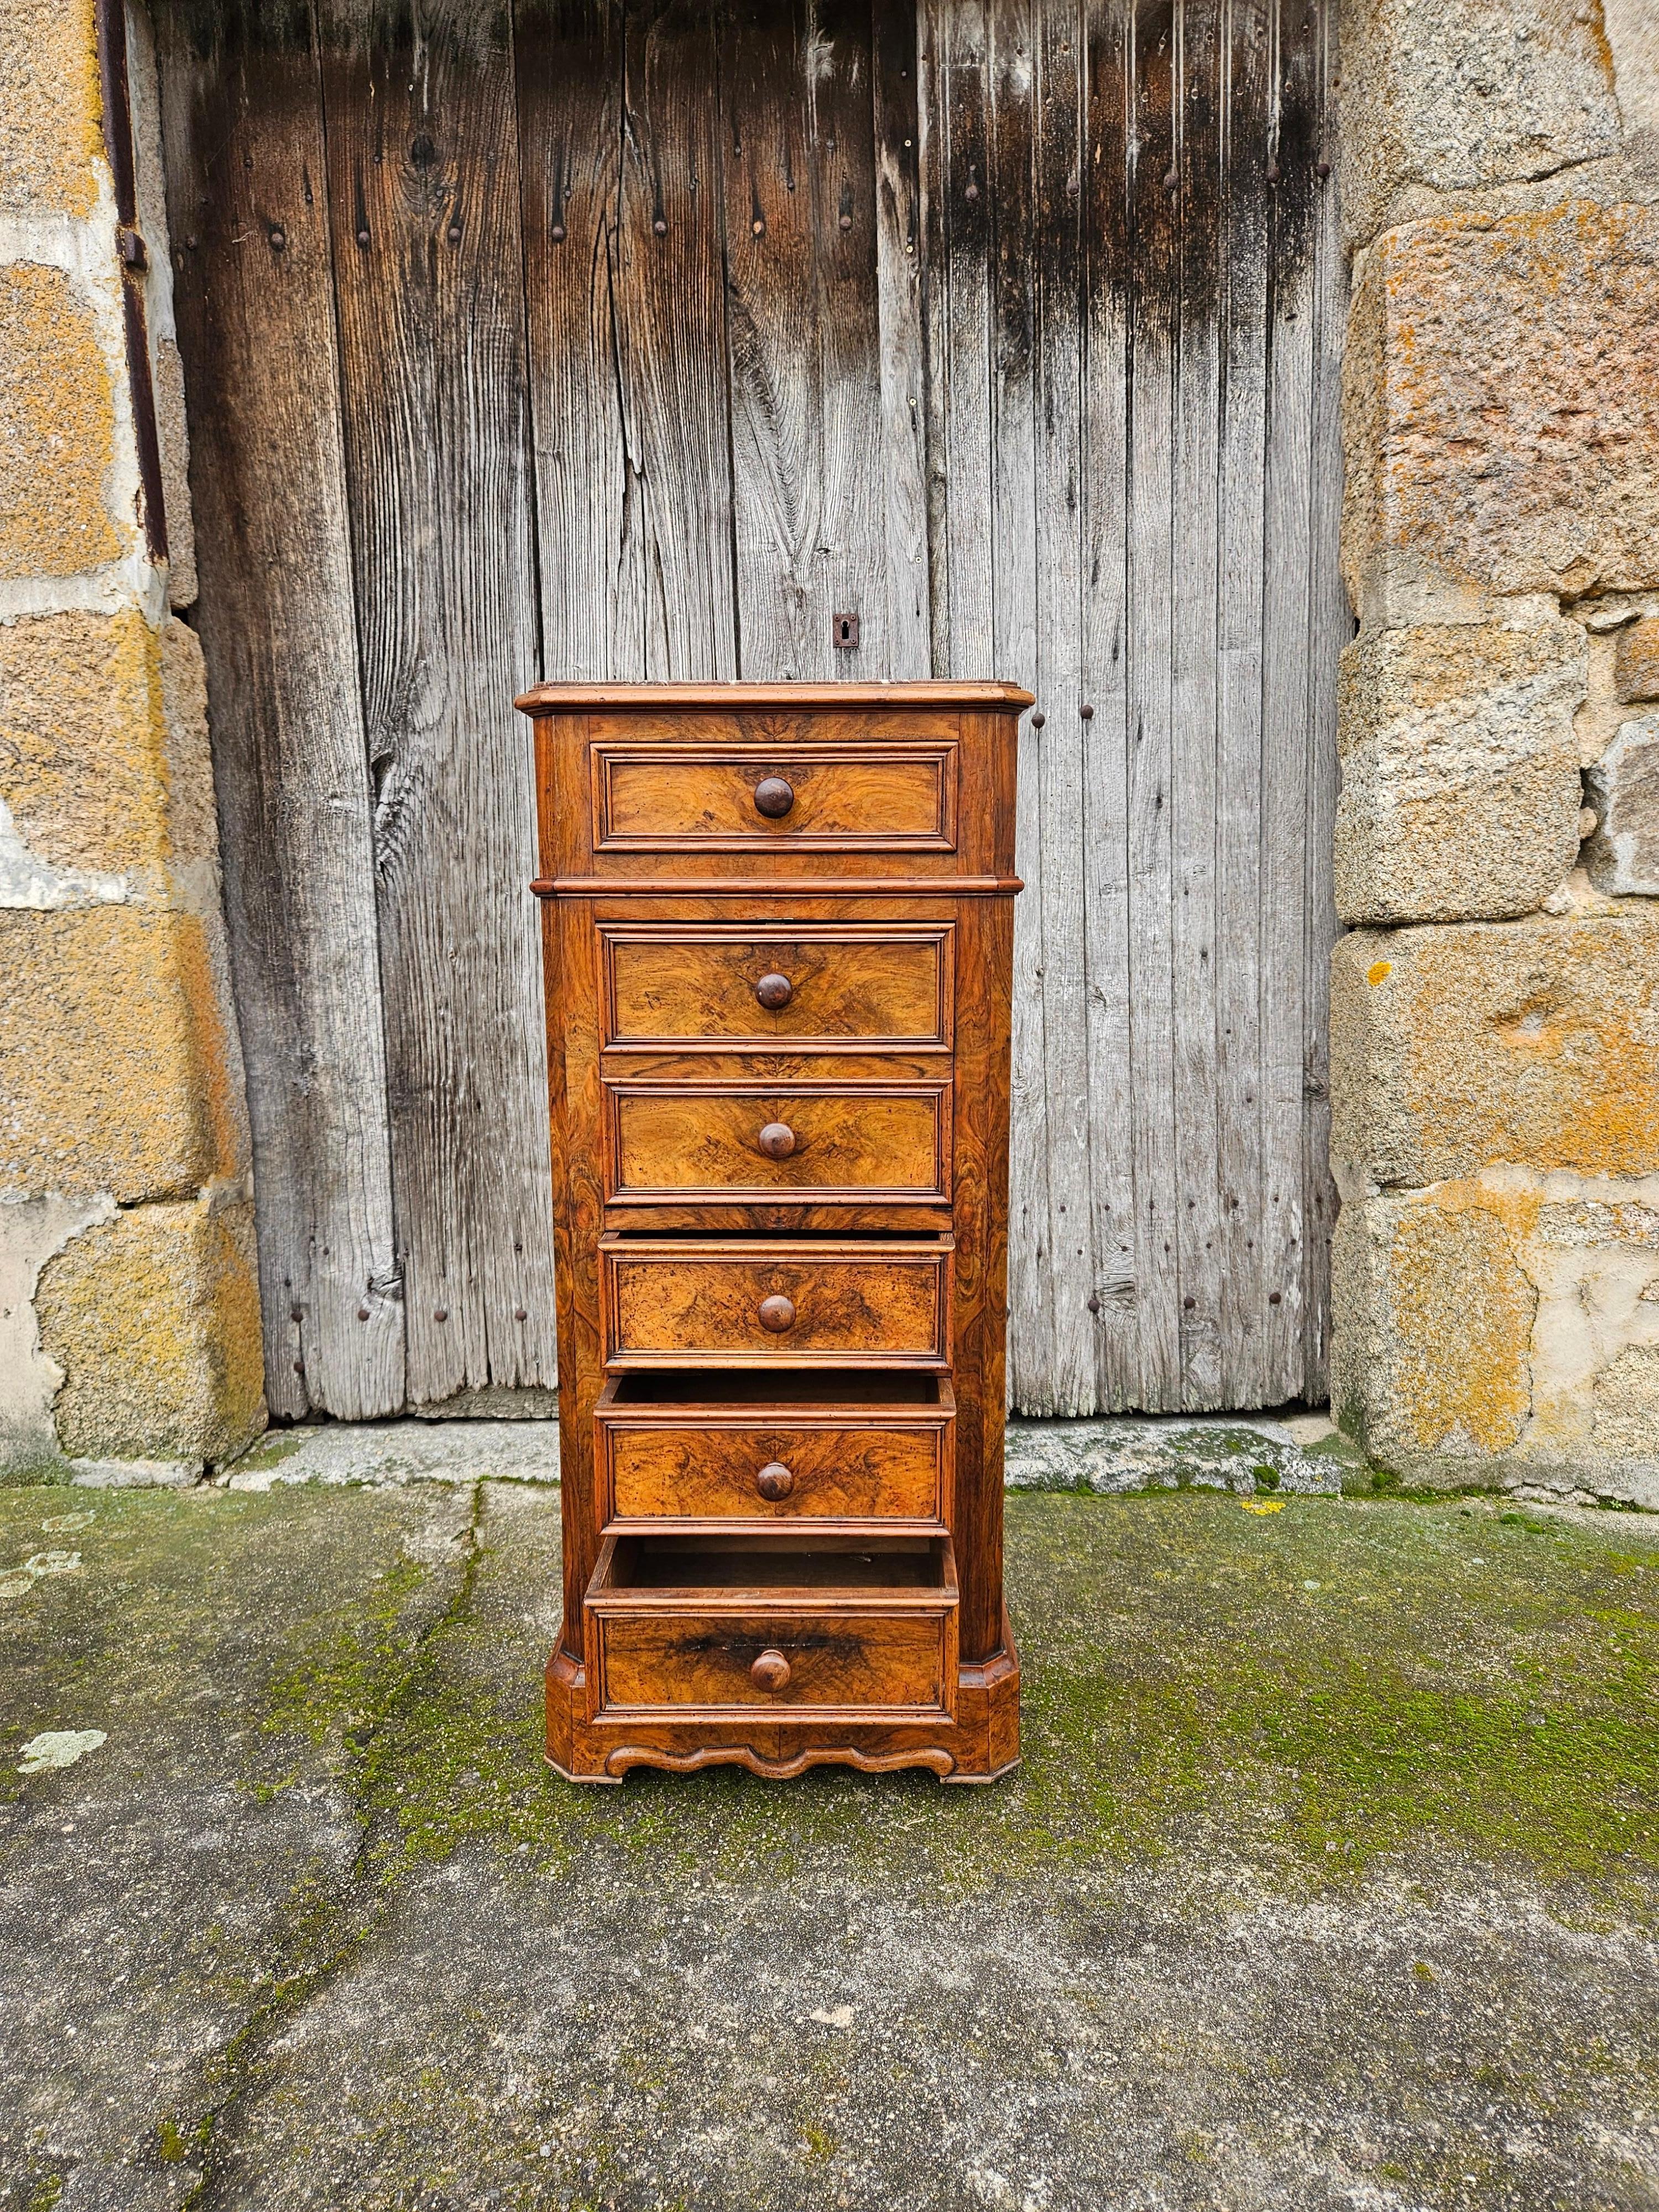 French Vintage Nightstand- Bedside Table - Bedside Console from the late 19th Century.
Made of walnut with veneer of burled Walnut Front - very solid handicraft .
It has four Drawers and a Door that hinges open to reveal an Interior Compartment,